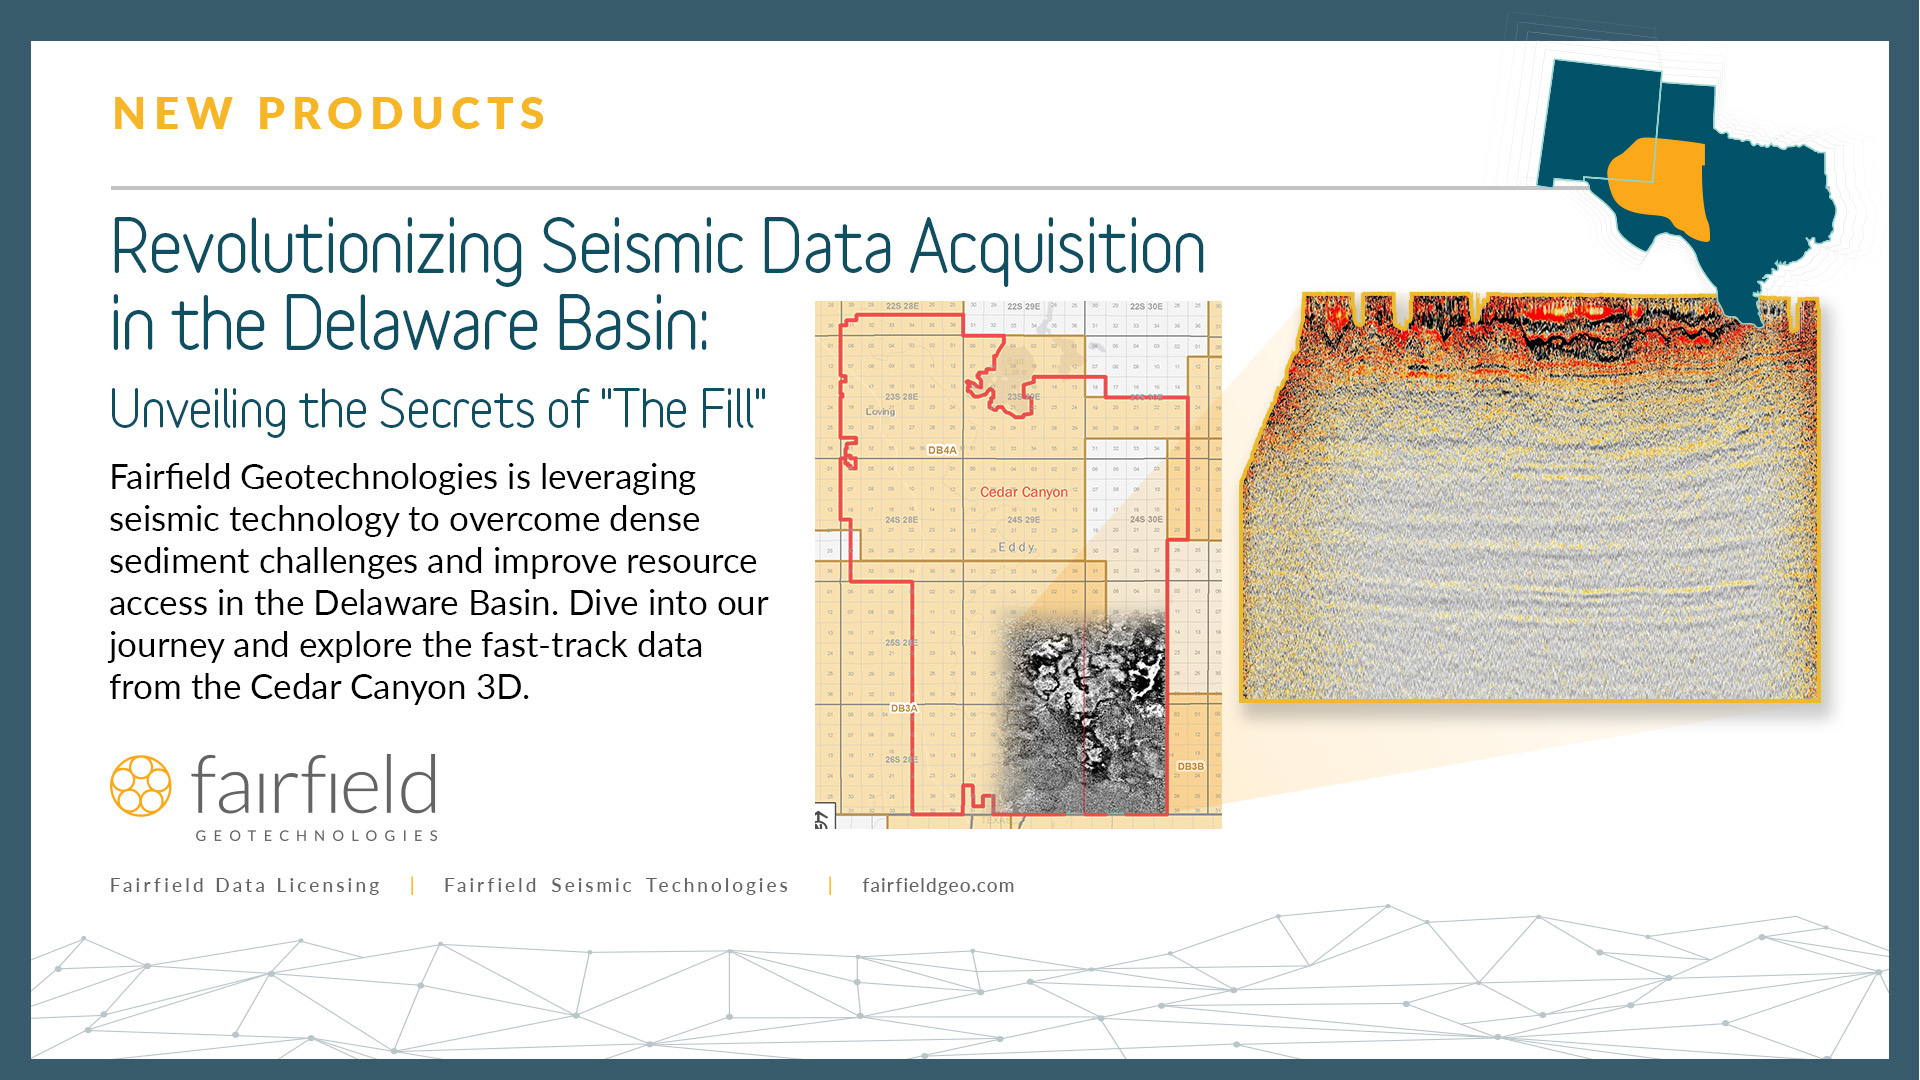 Revolutionizing Seismic Data Acquisition in the Delaware Basin: Unveiling the Secrets of "The Fill"